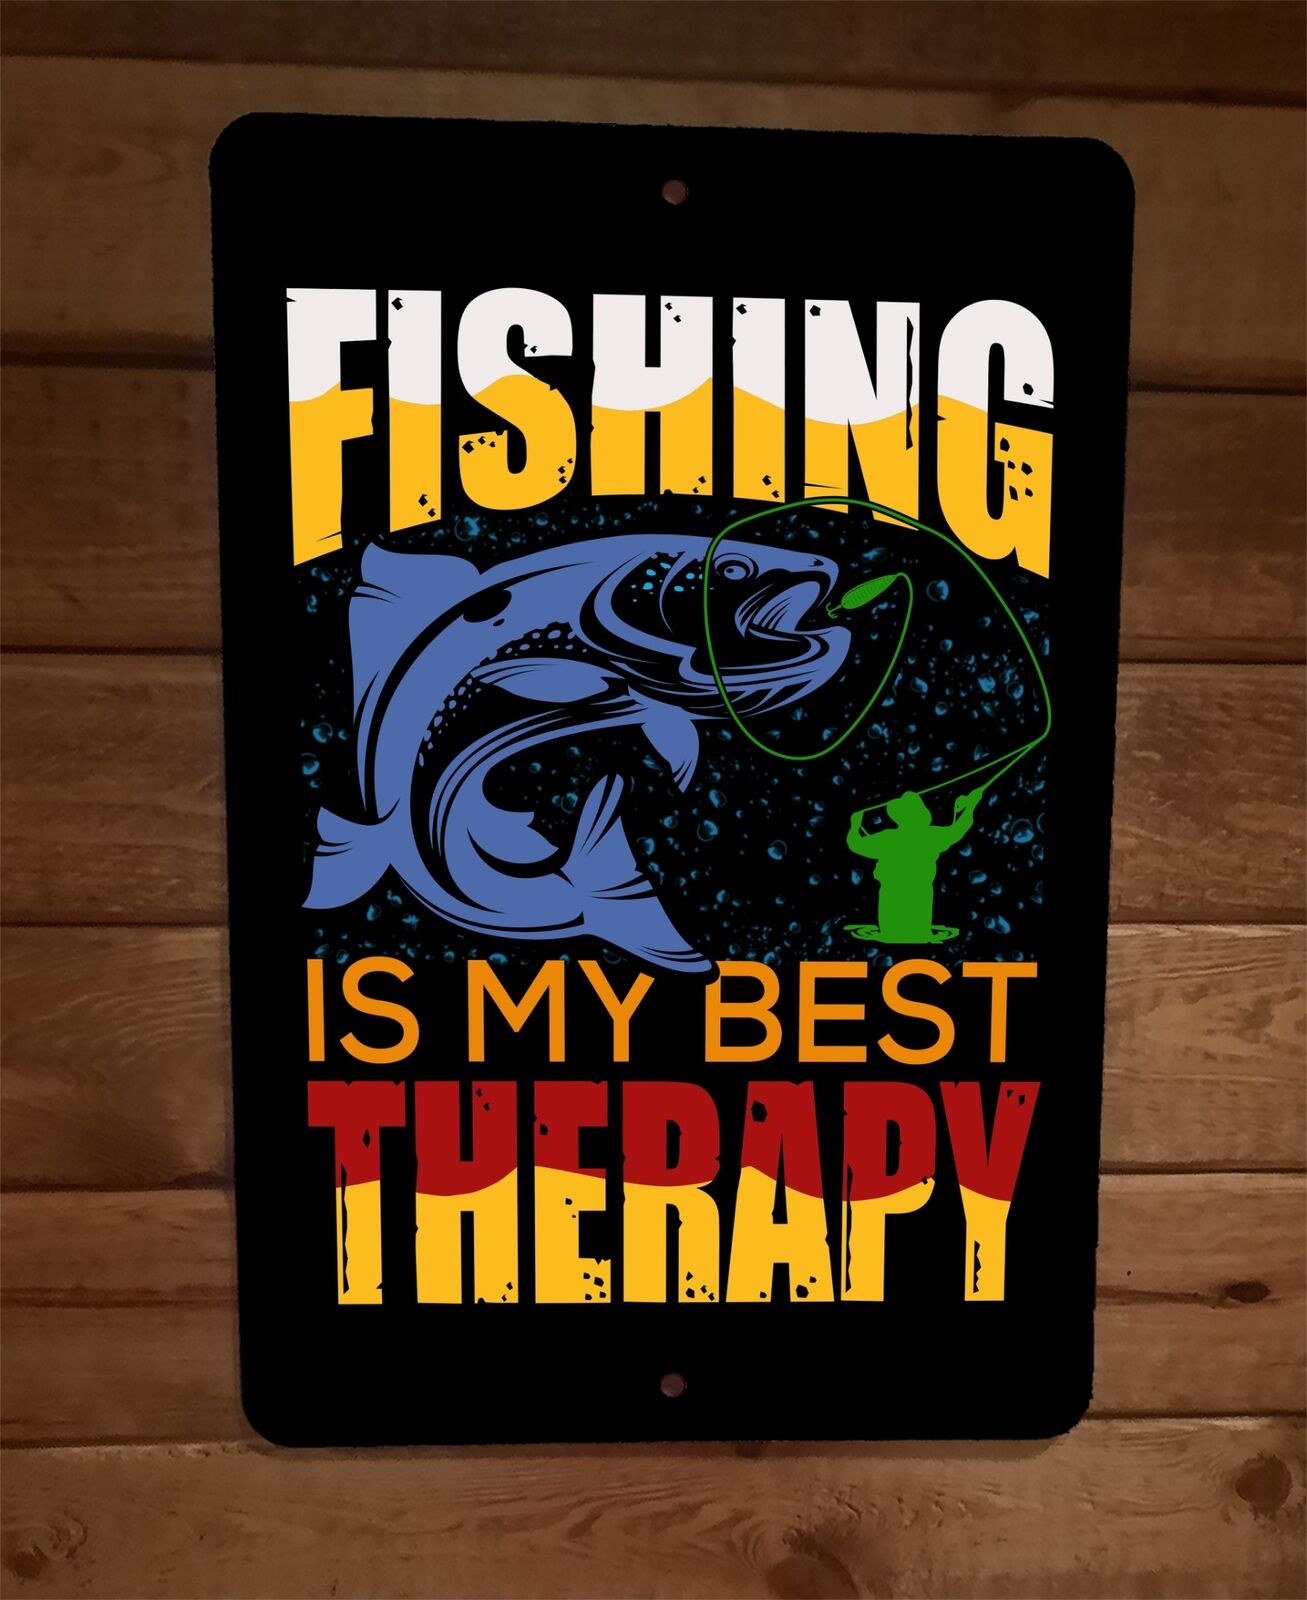 Fishing is my Best Therapy Sports 8x12 Metal Wall Sign